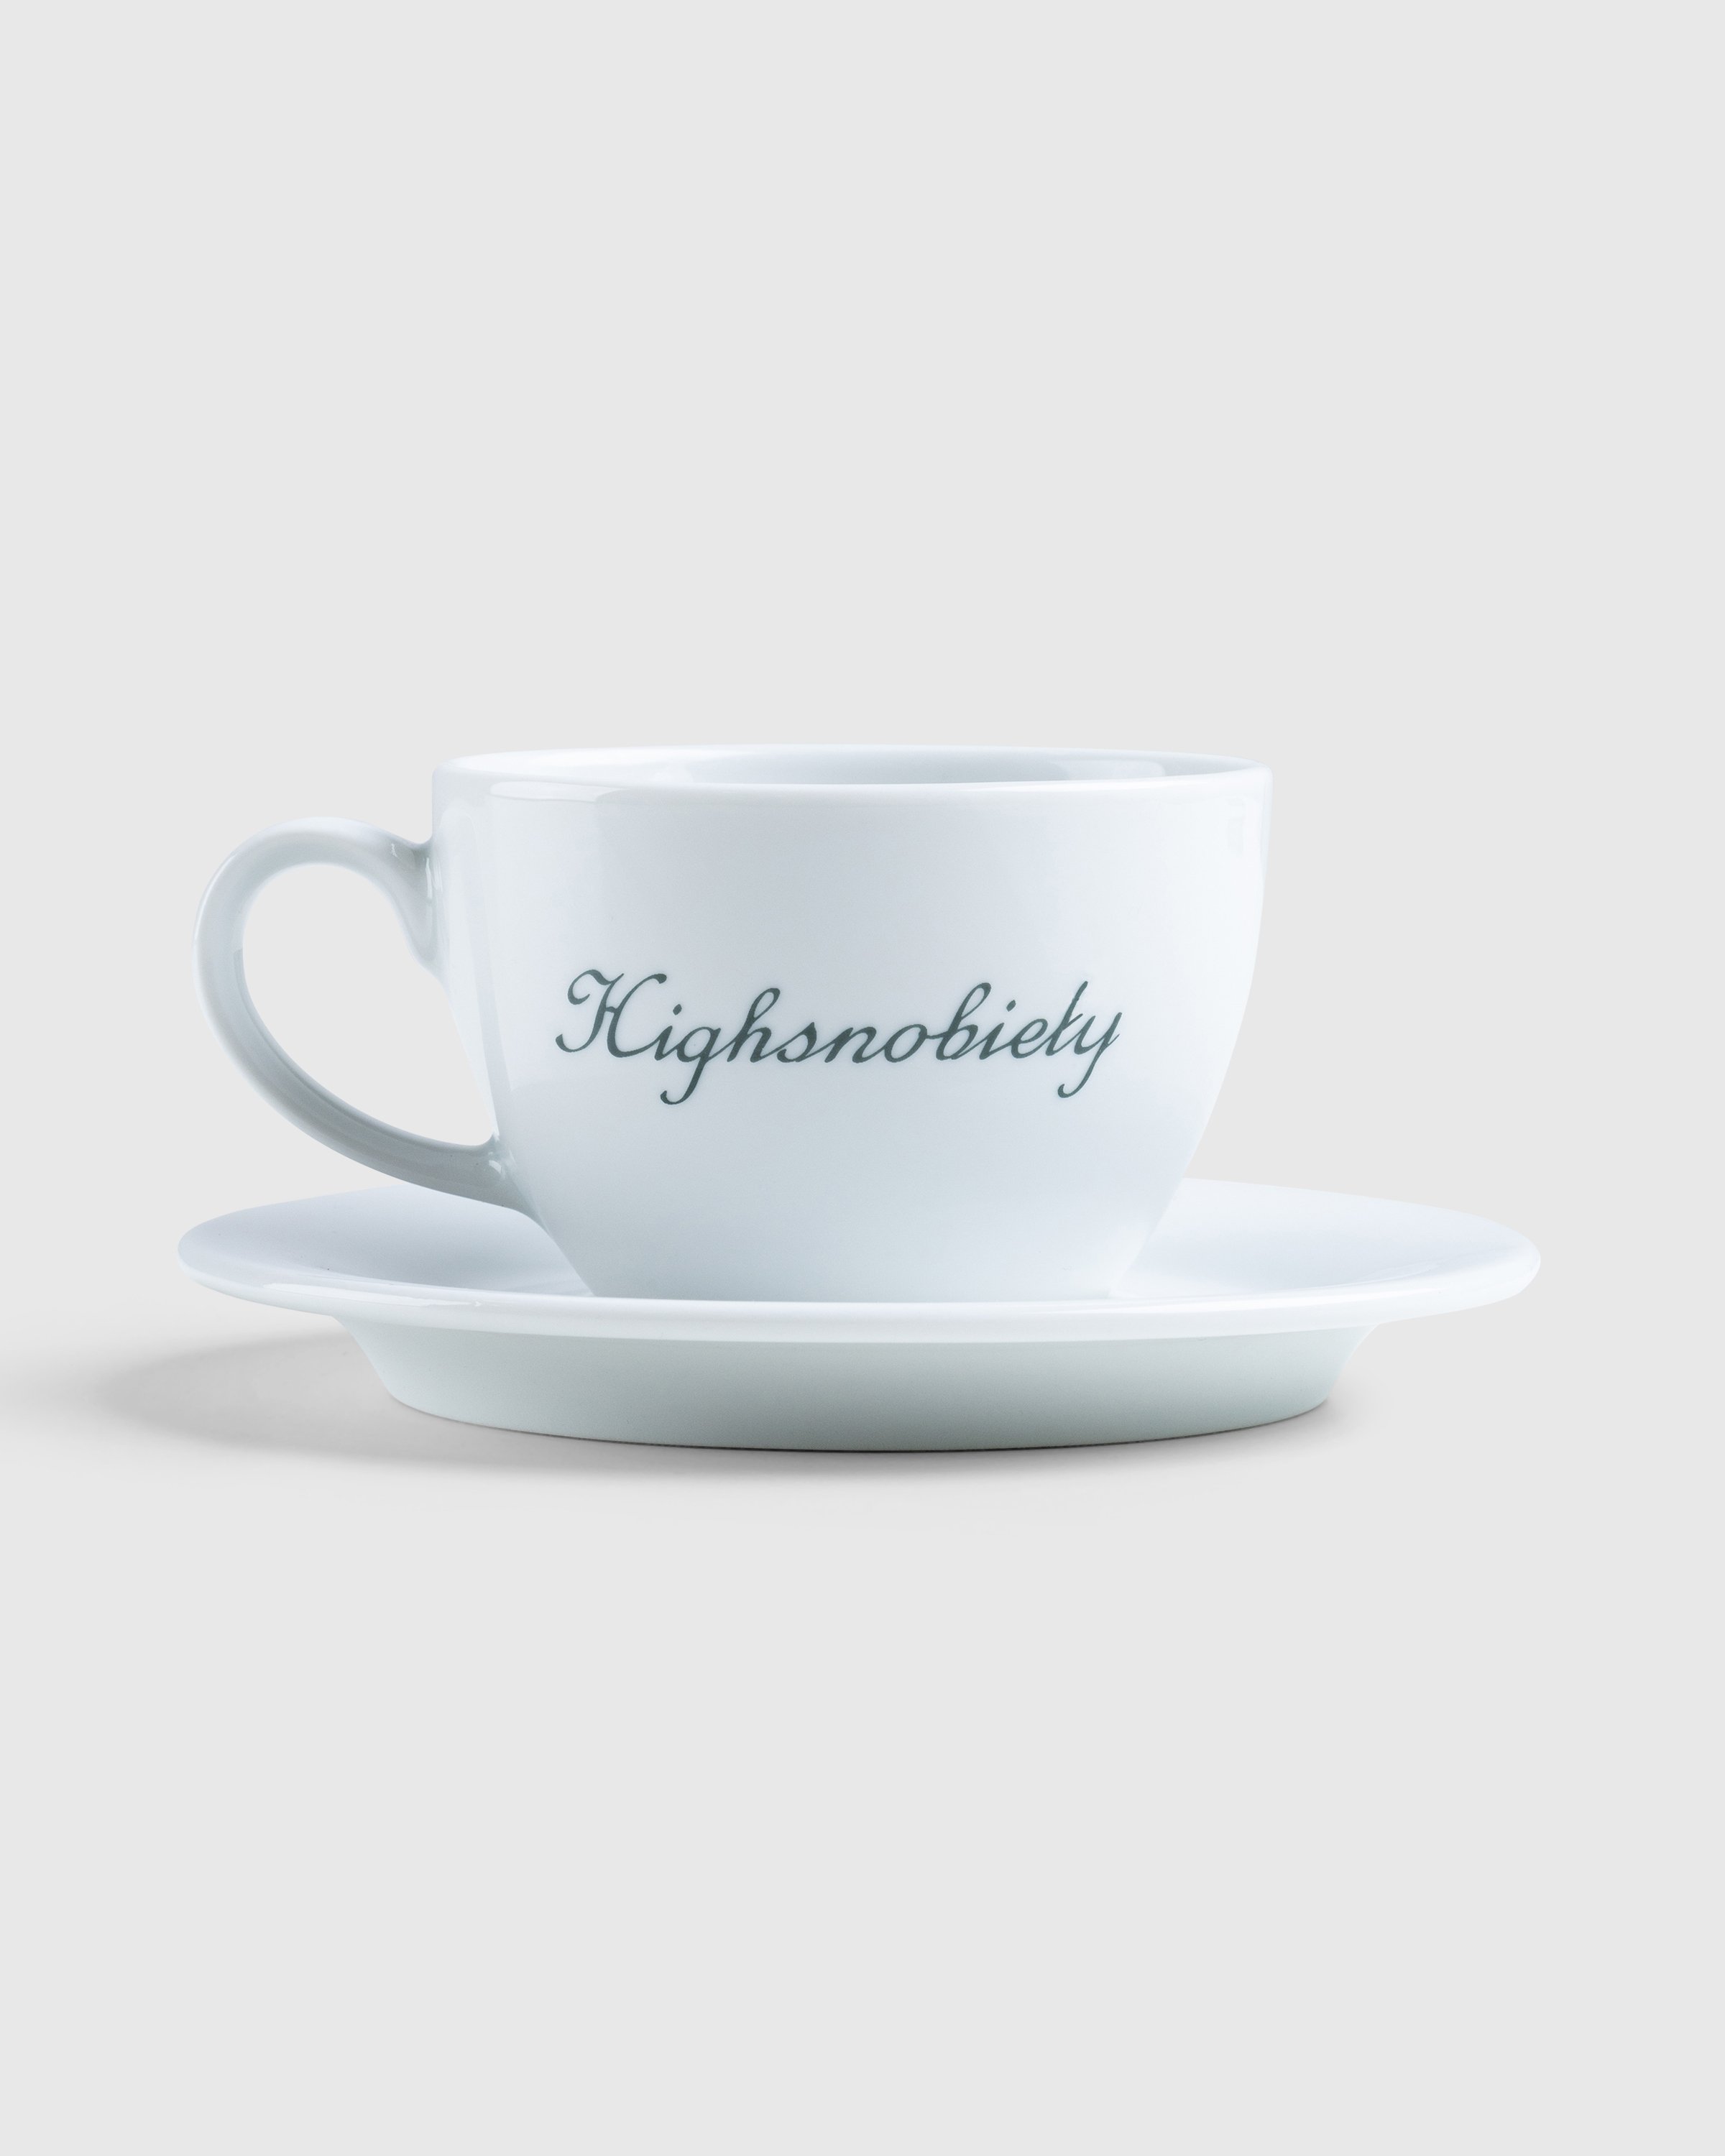 Café de Flore x Highsnobiety - Breakfast Cup and Saucer - Lifestyle - White - Image 2